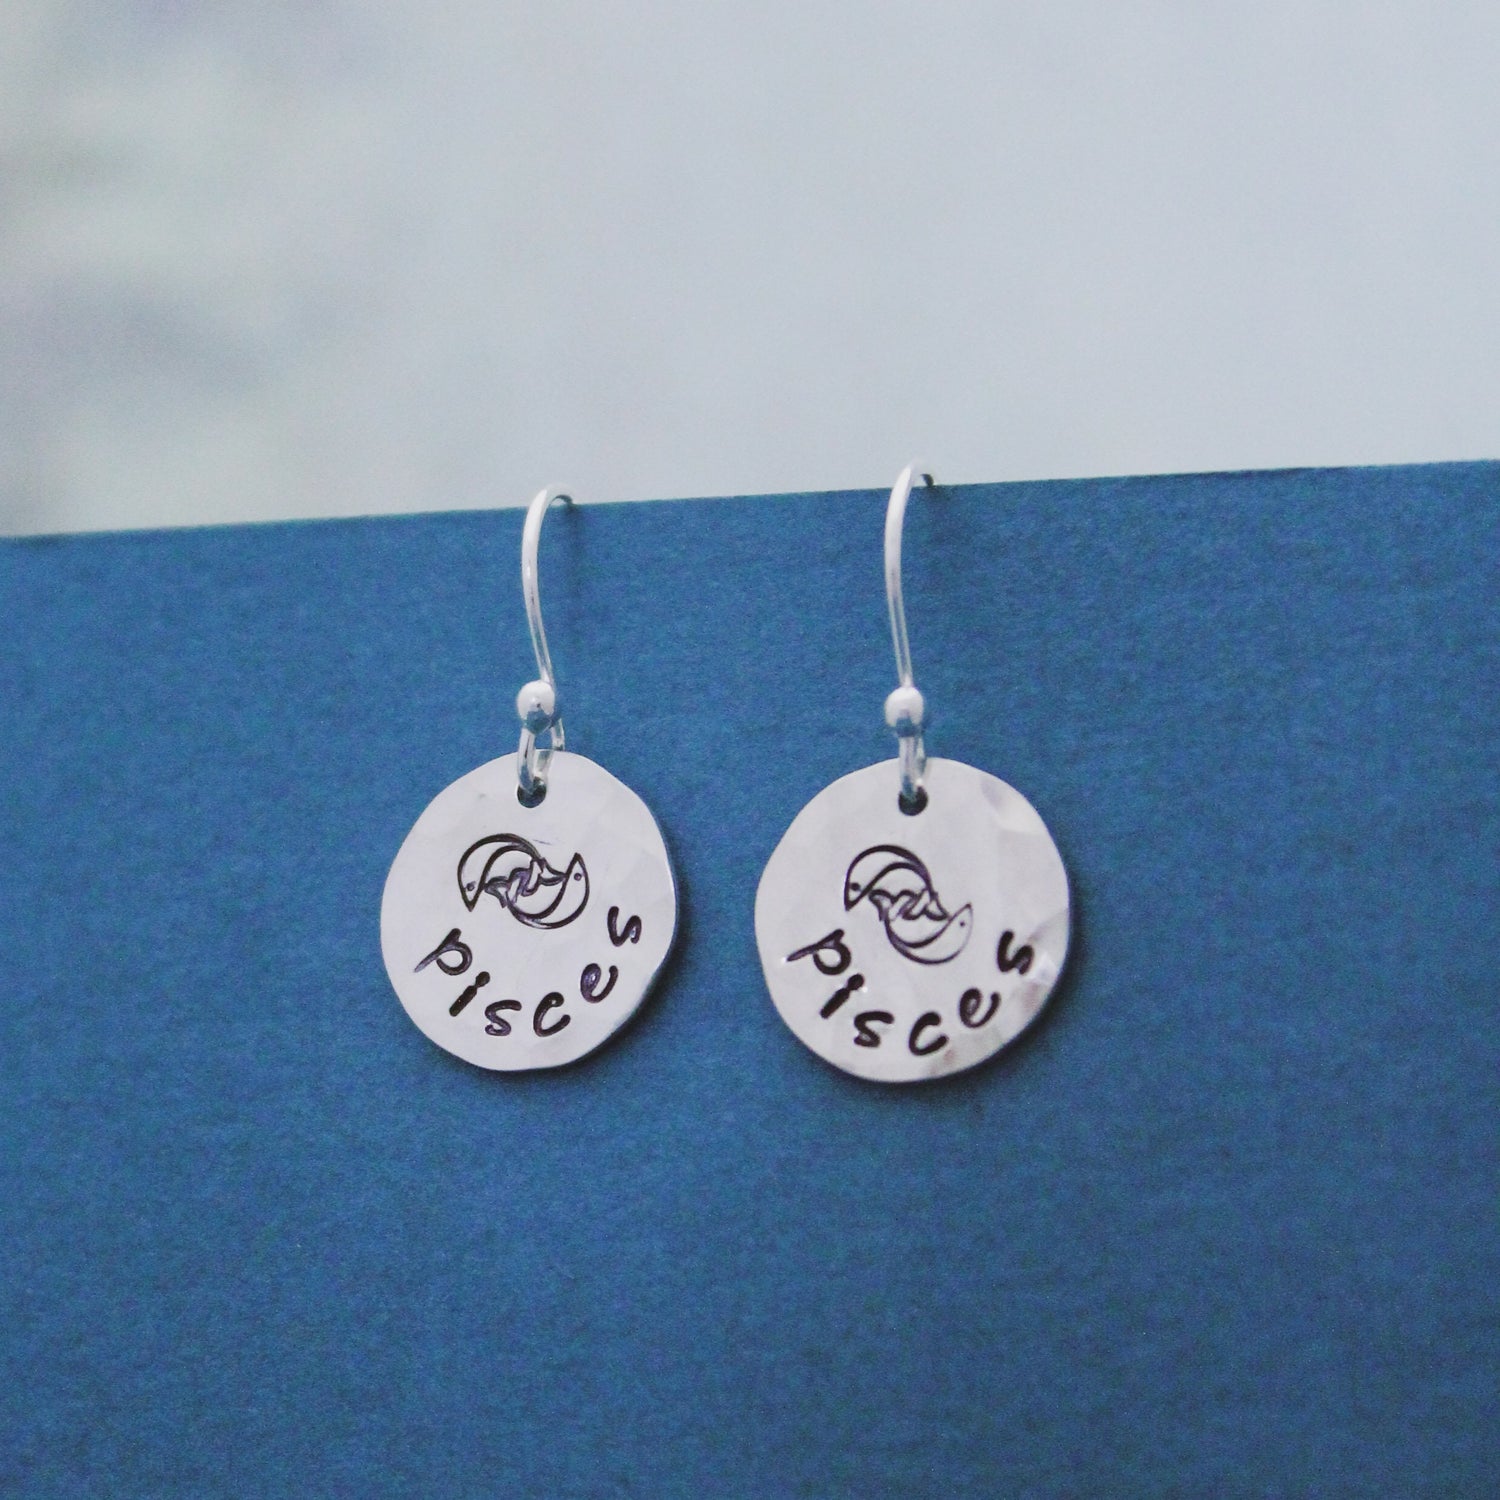 Pisces Sterling Silver Earrings, Pisces Zodiac Sign Jewelry, Hand Stamped Personalized Earrings, Pisces Zodiac Jewelry Unique Gift for Her